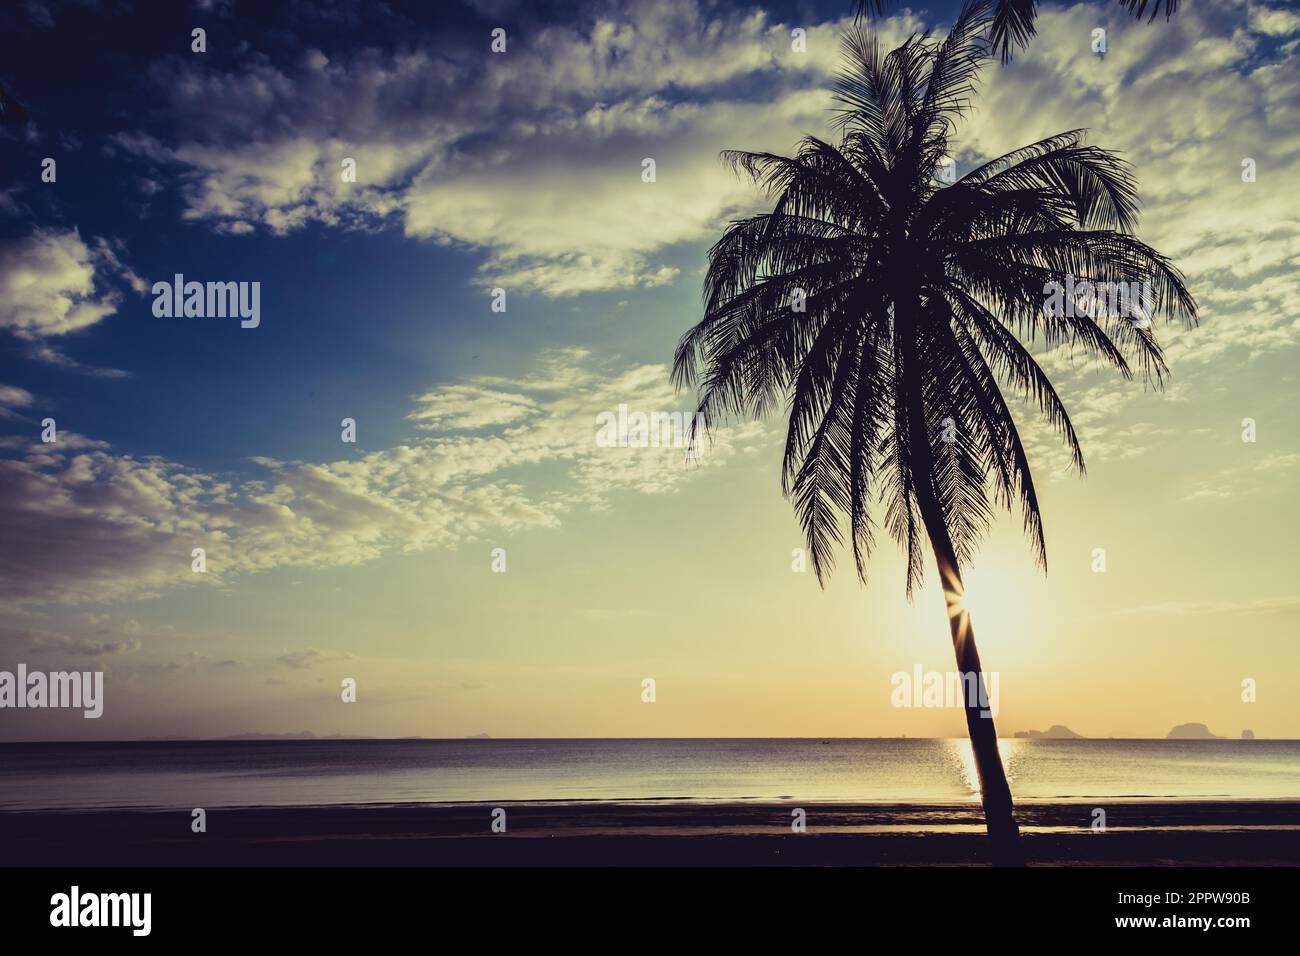 Siluate coconut tree on the beach before sunset background Stock Photo